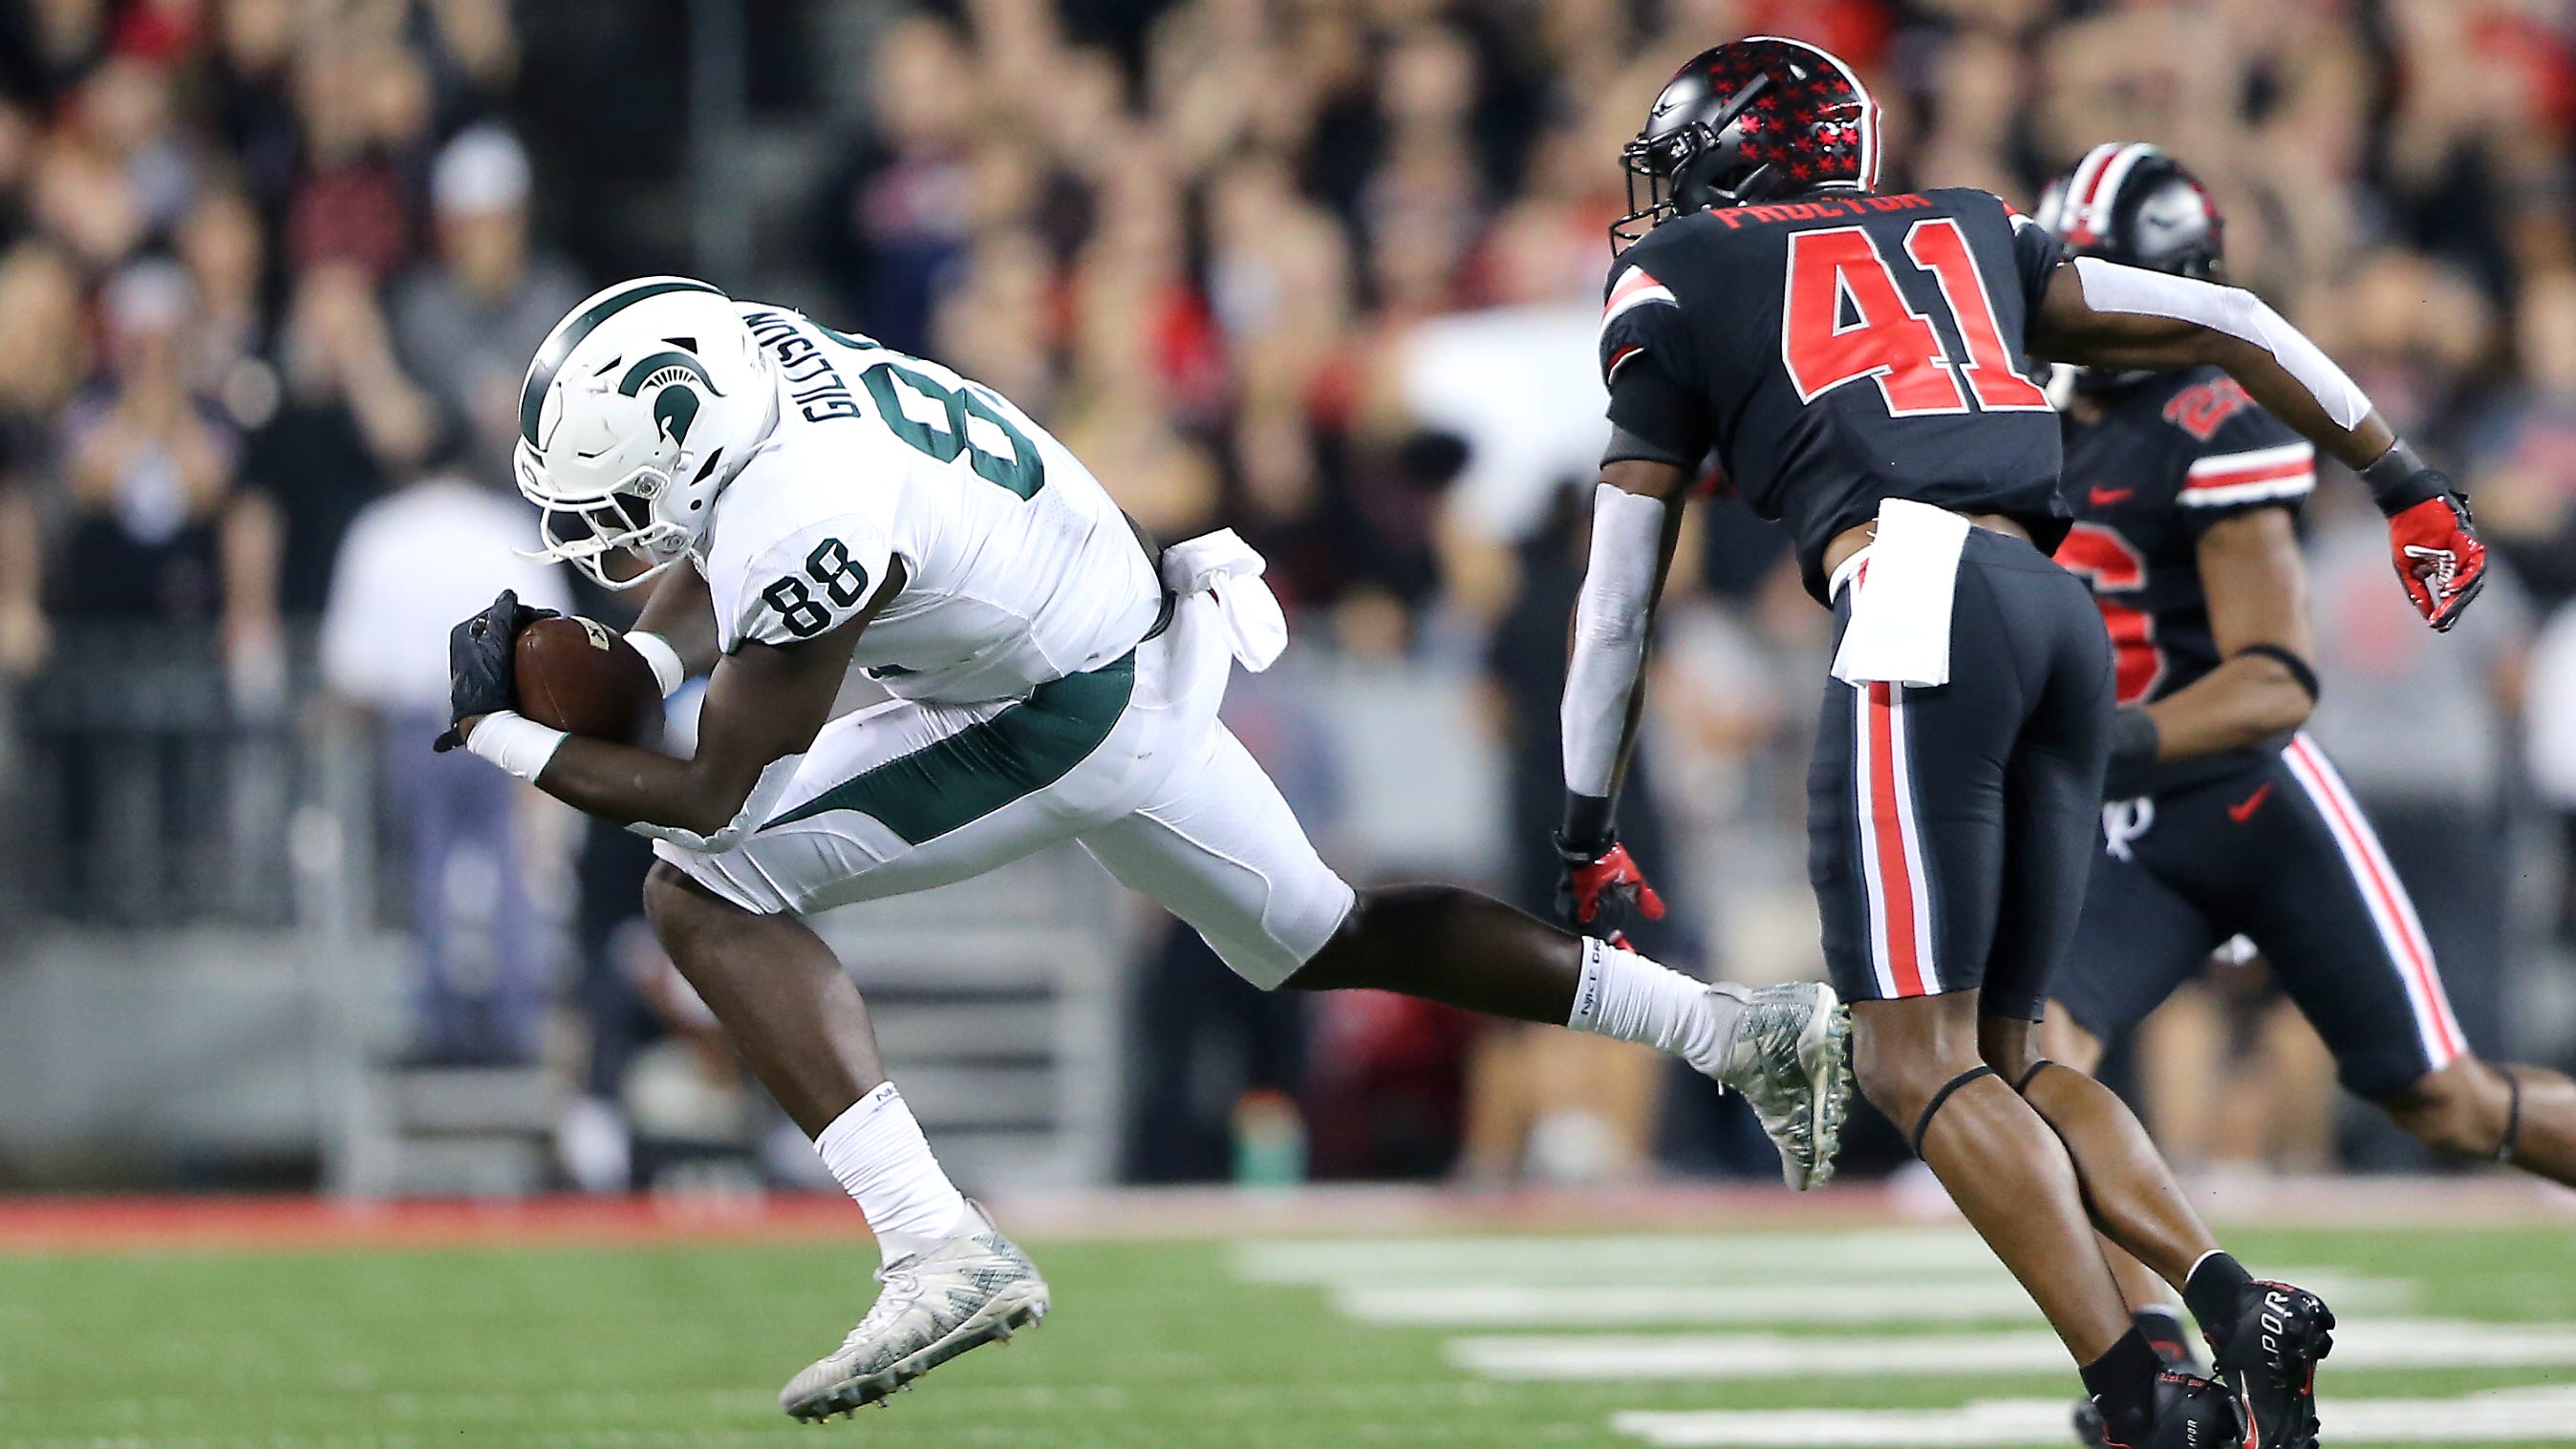 MSU vs. Ohio State football How to watch on TV, live stream, odds